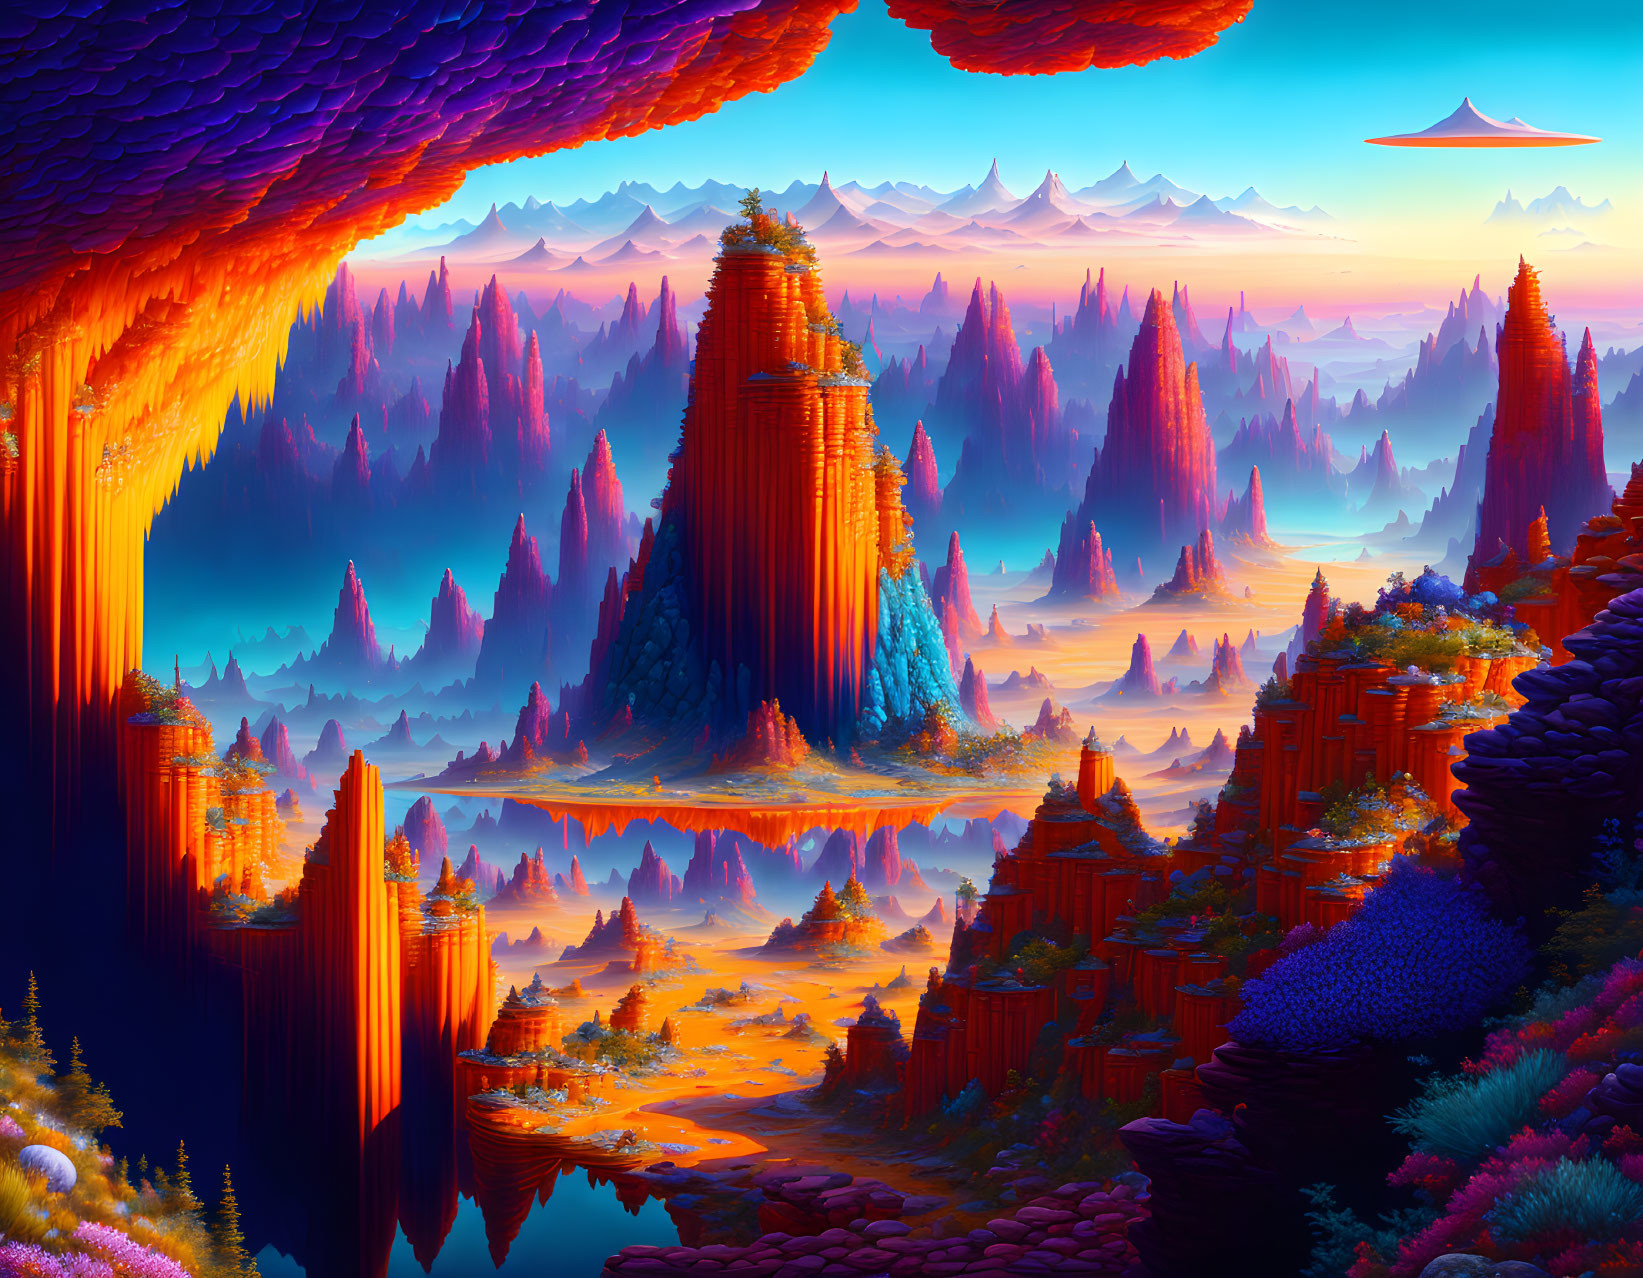 Colorful surreal landscape with neon foliage, towering rocks, water, and flying object